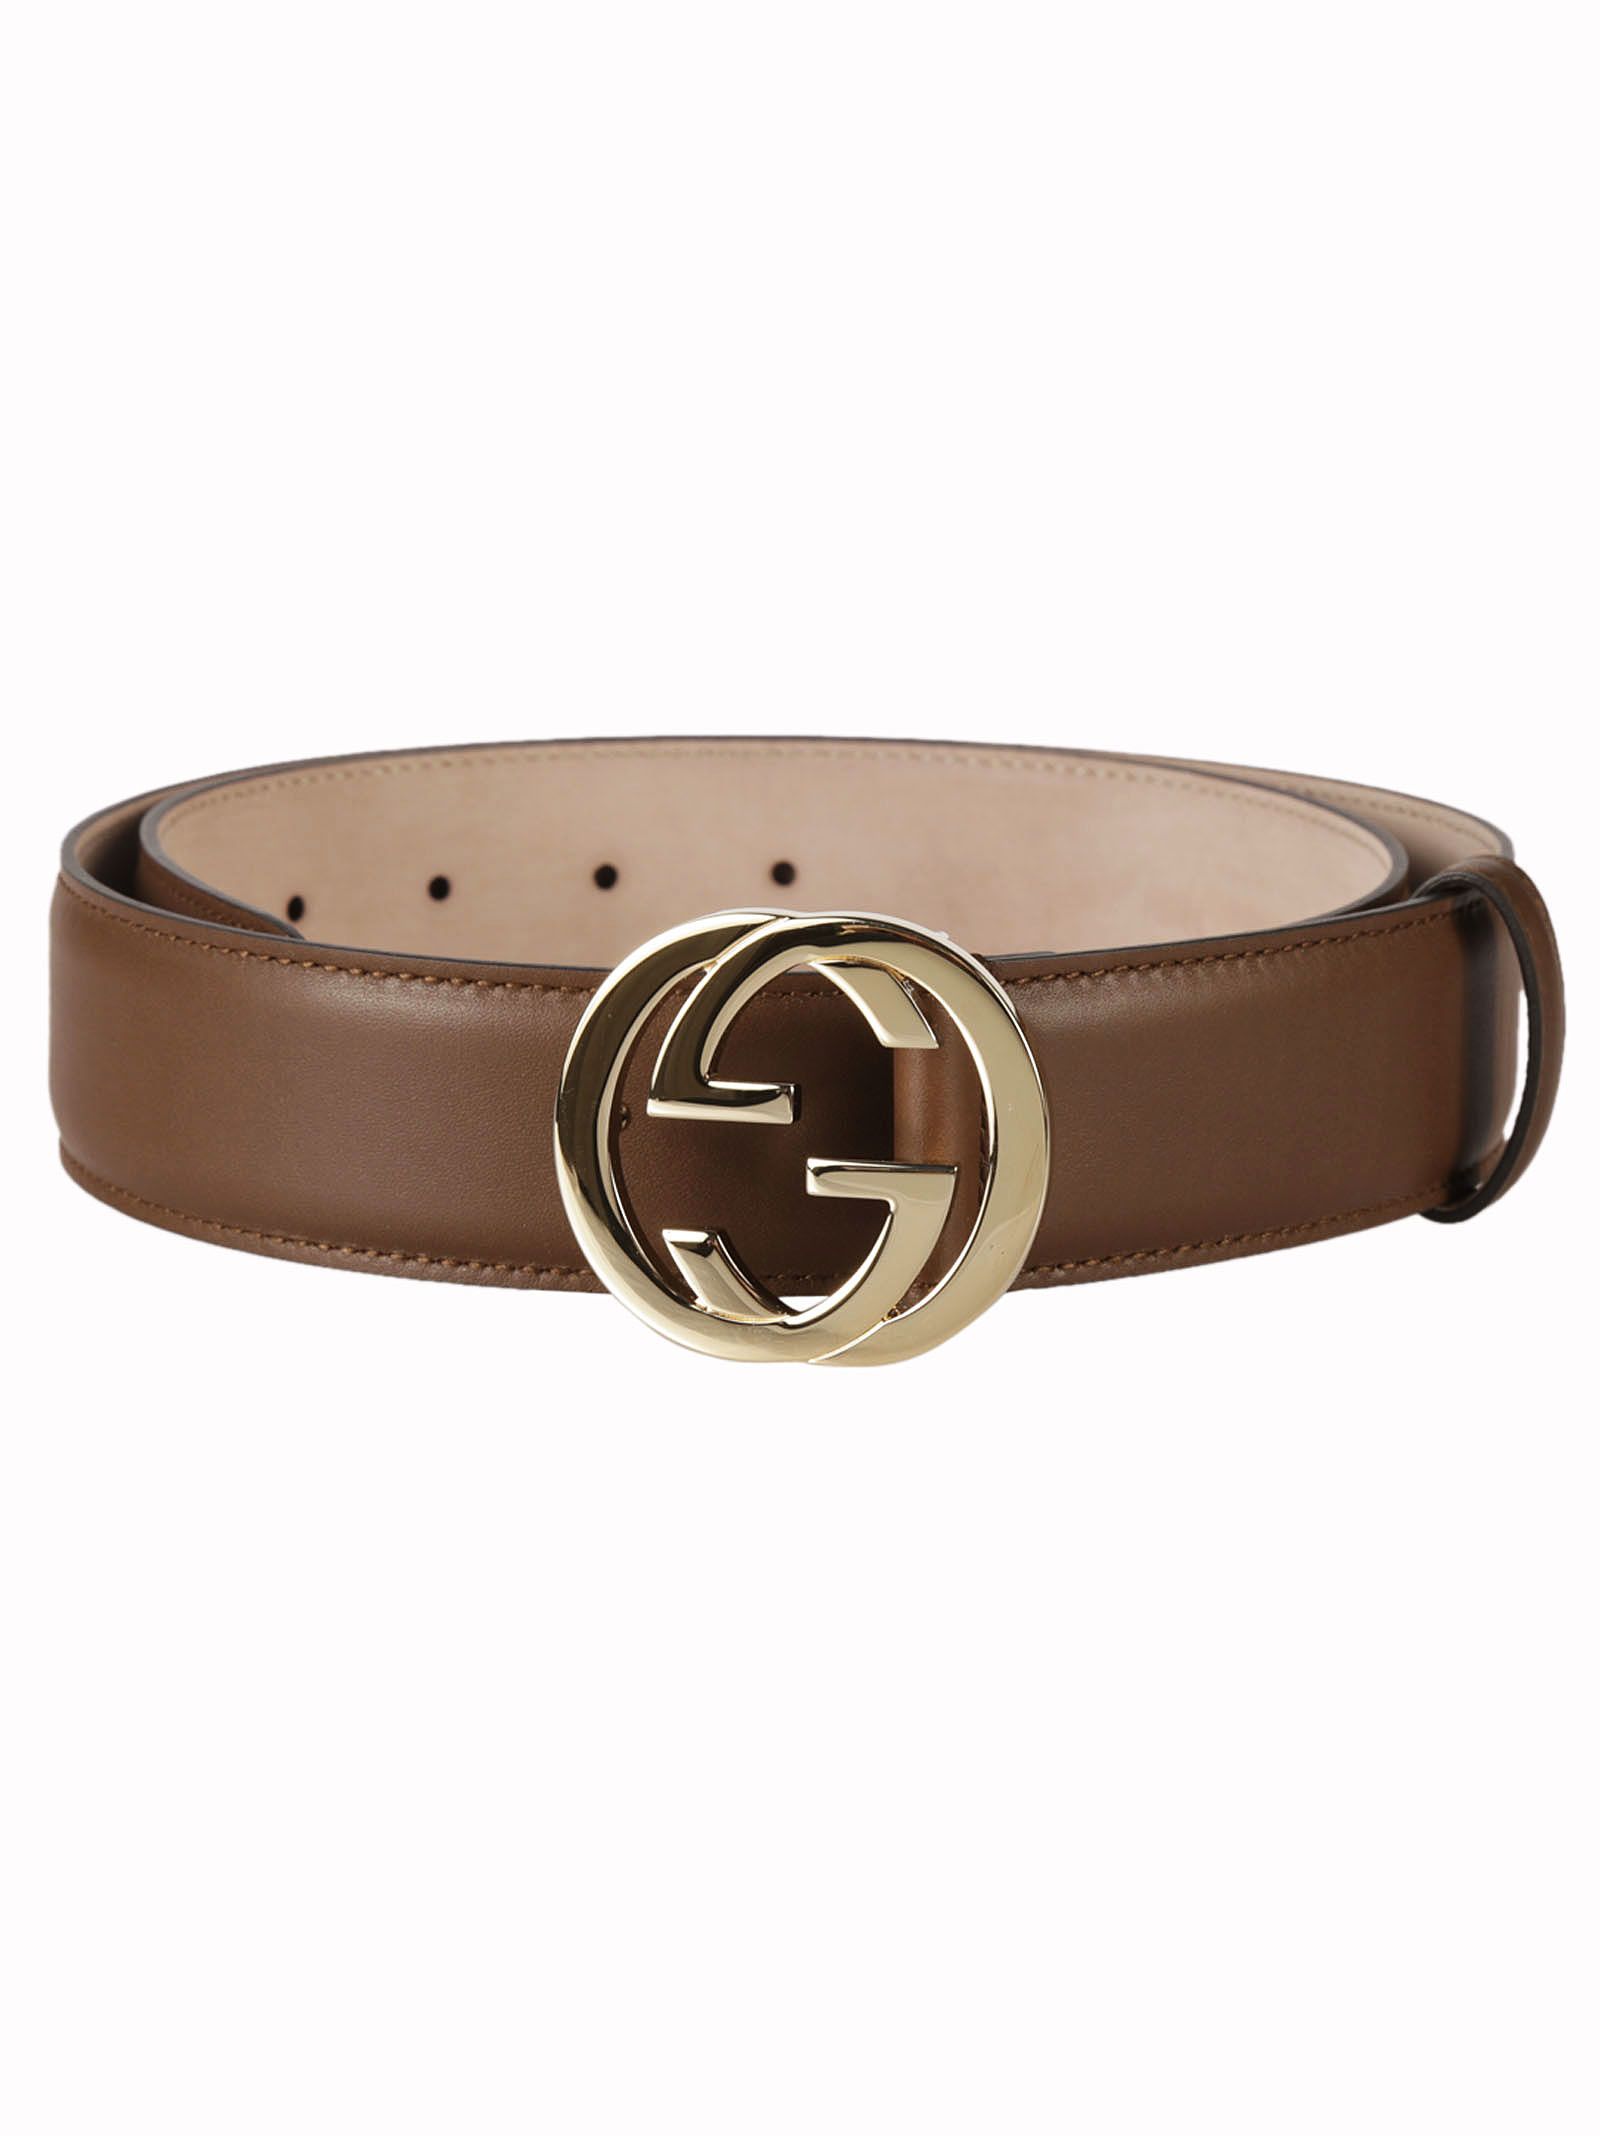 italist | Best price in the market for Gucci Gucci GG Buckle Belt - Brown - 6251703 | italist